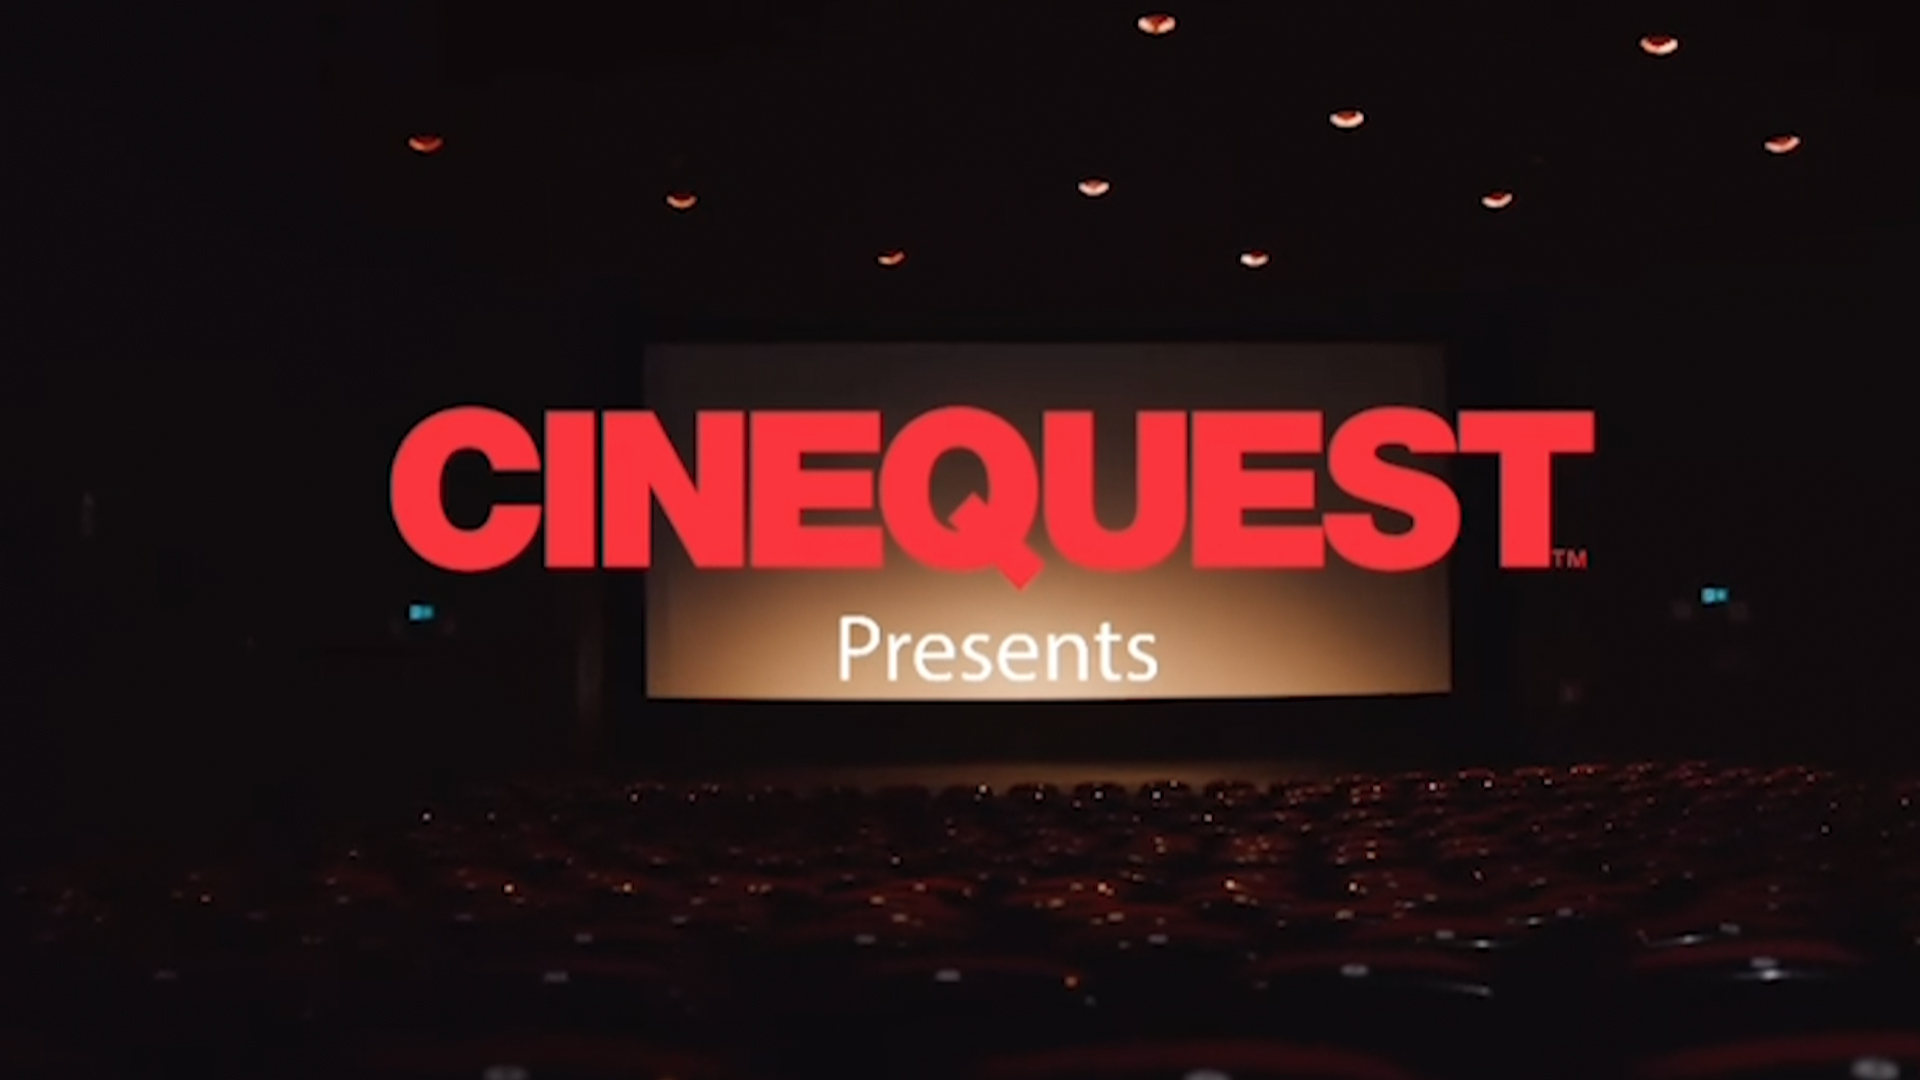 Cinequest Film Festival Back In Person News UpNOW Arts, Community and